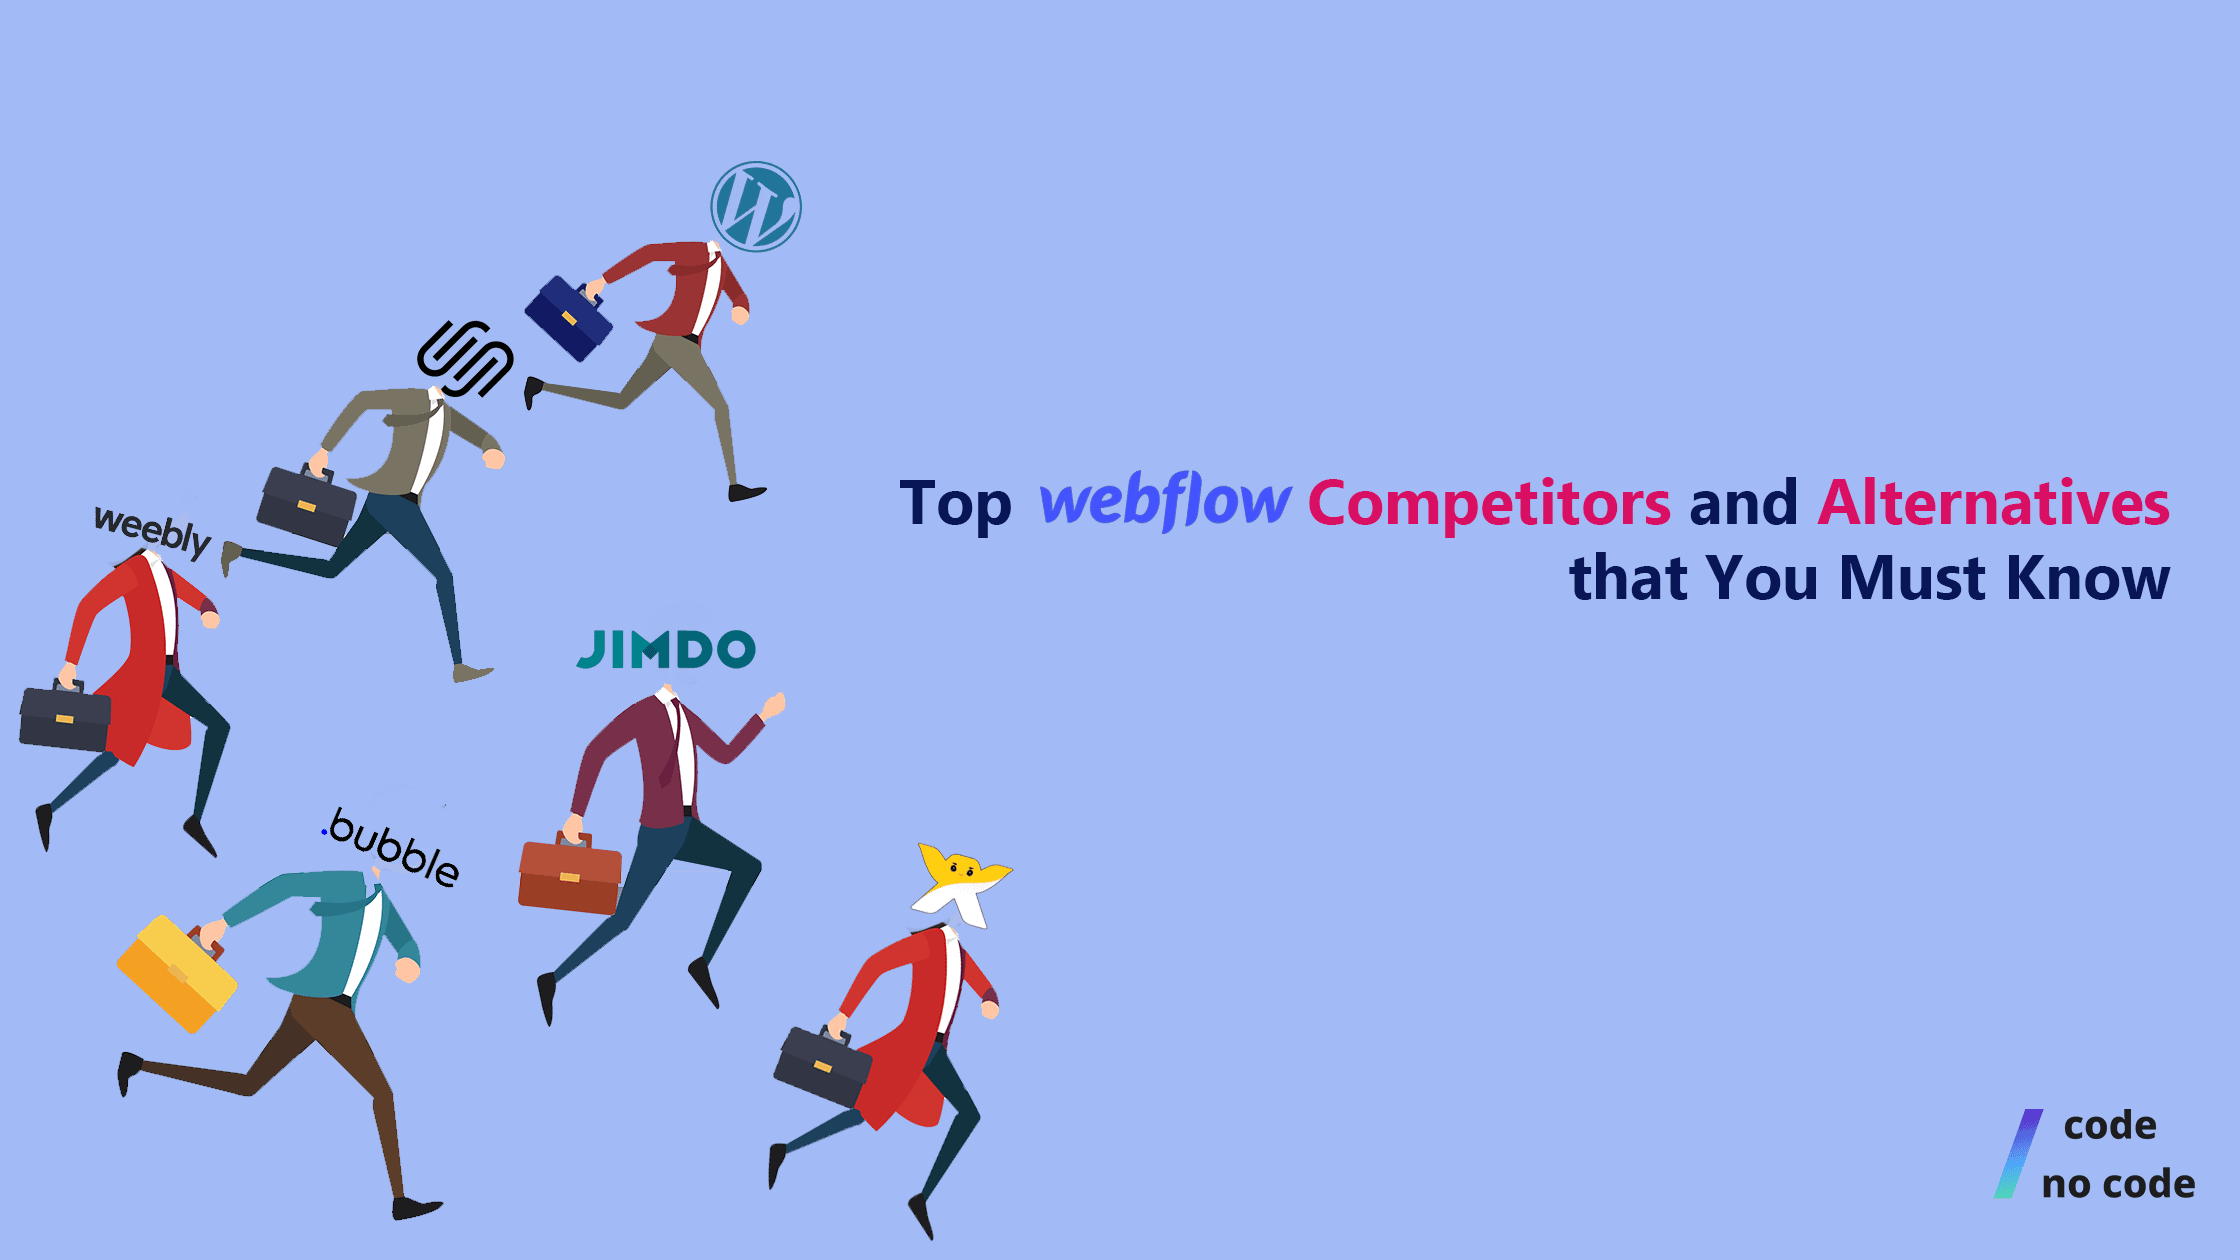 Businessmen running with the text "Top Webflow competitors and alternatives that you must know